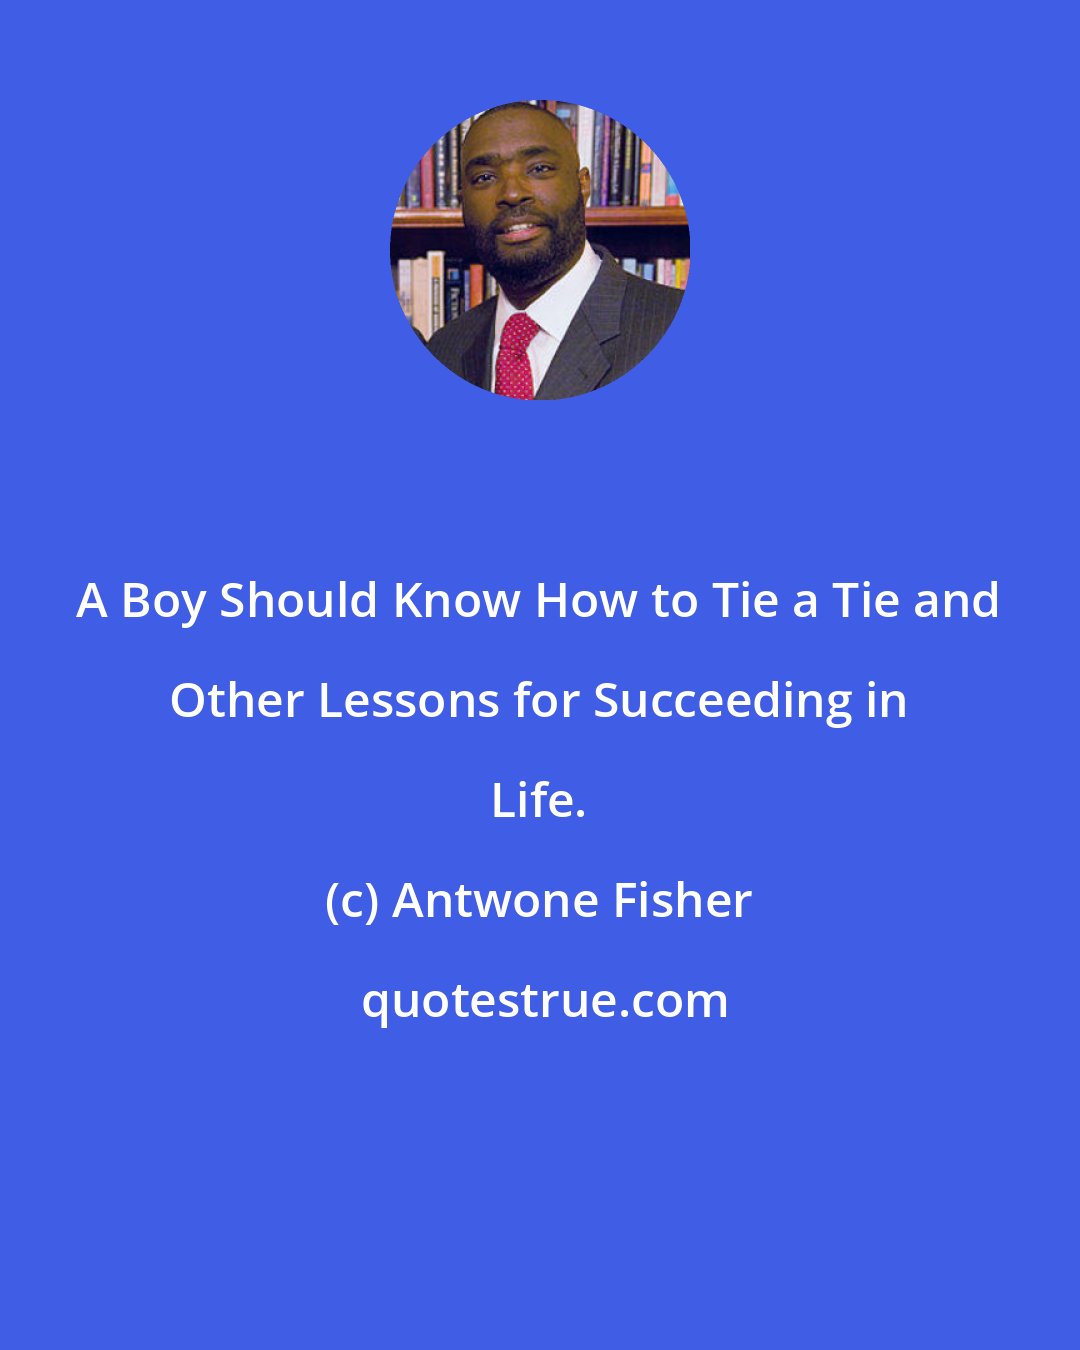 Antwone Fisher: A Boy Should Know How to Tie a Tie and Other Lessons for Succeeding in Life.